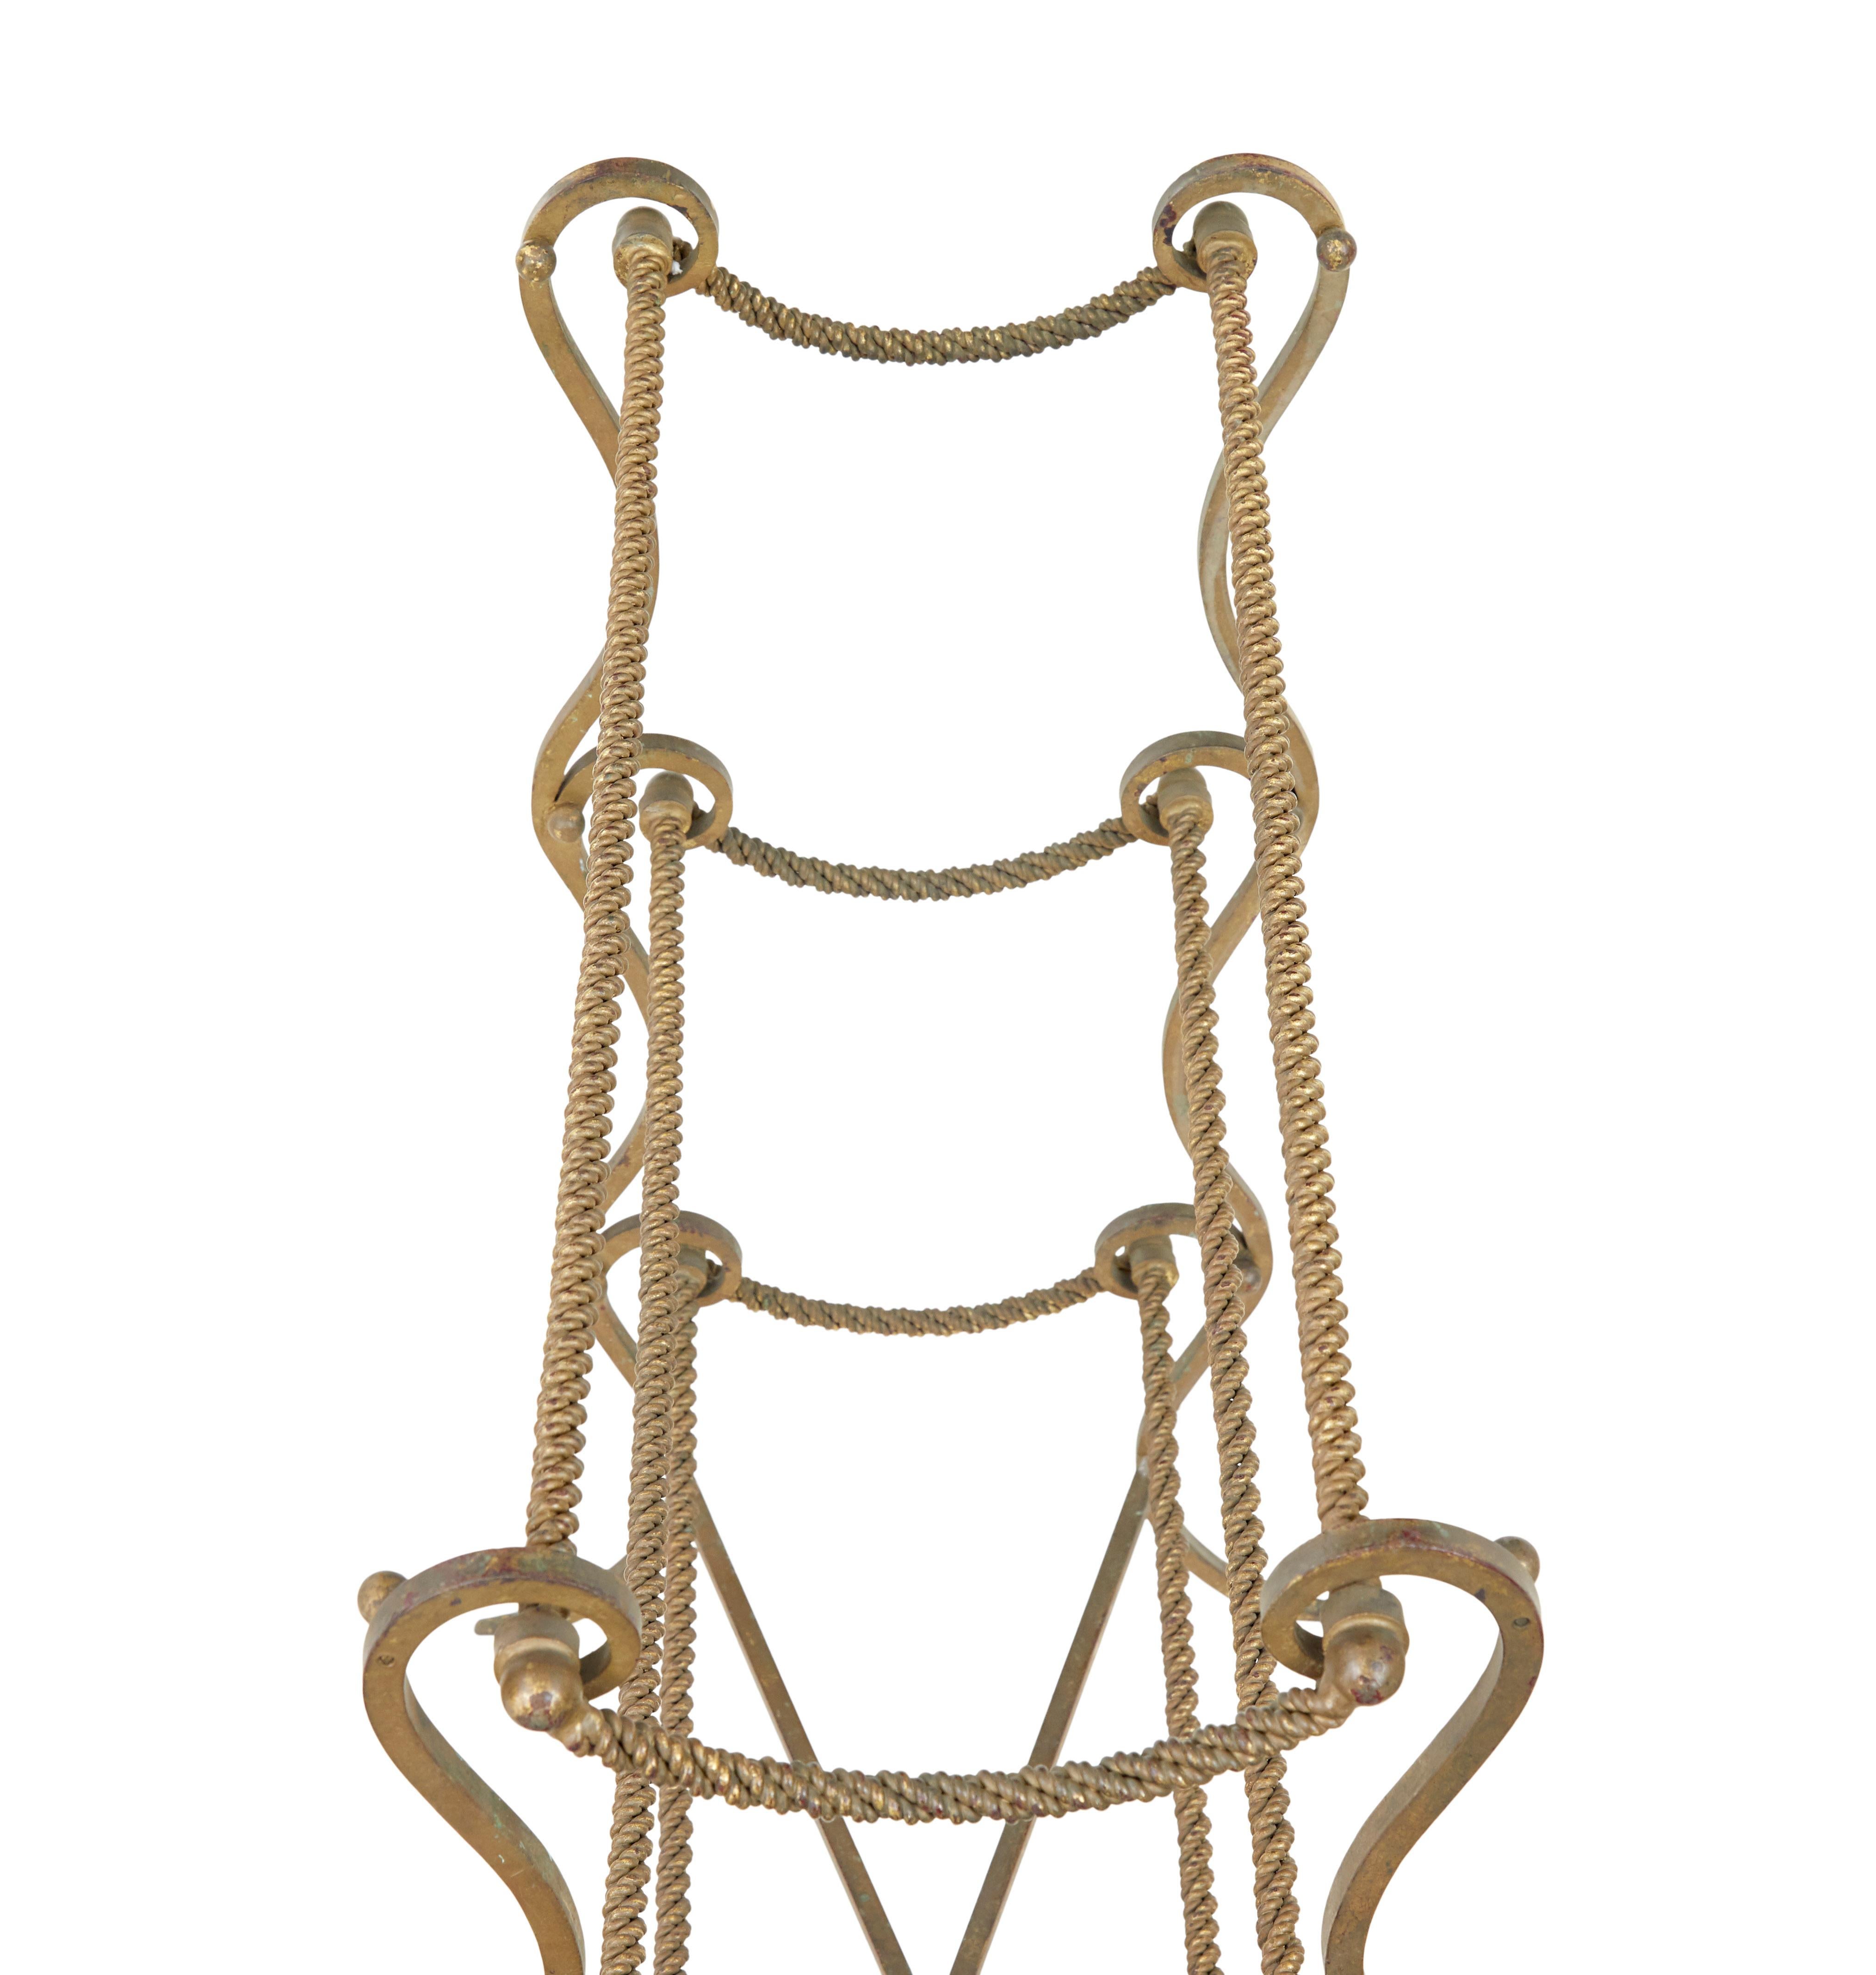 Hand-Crafted 1960’s decorative metalwork towel rail